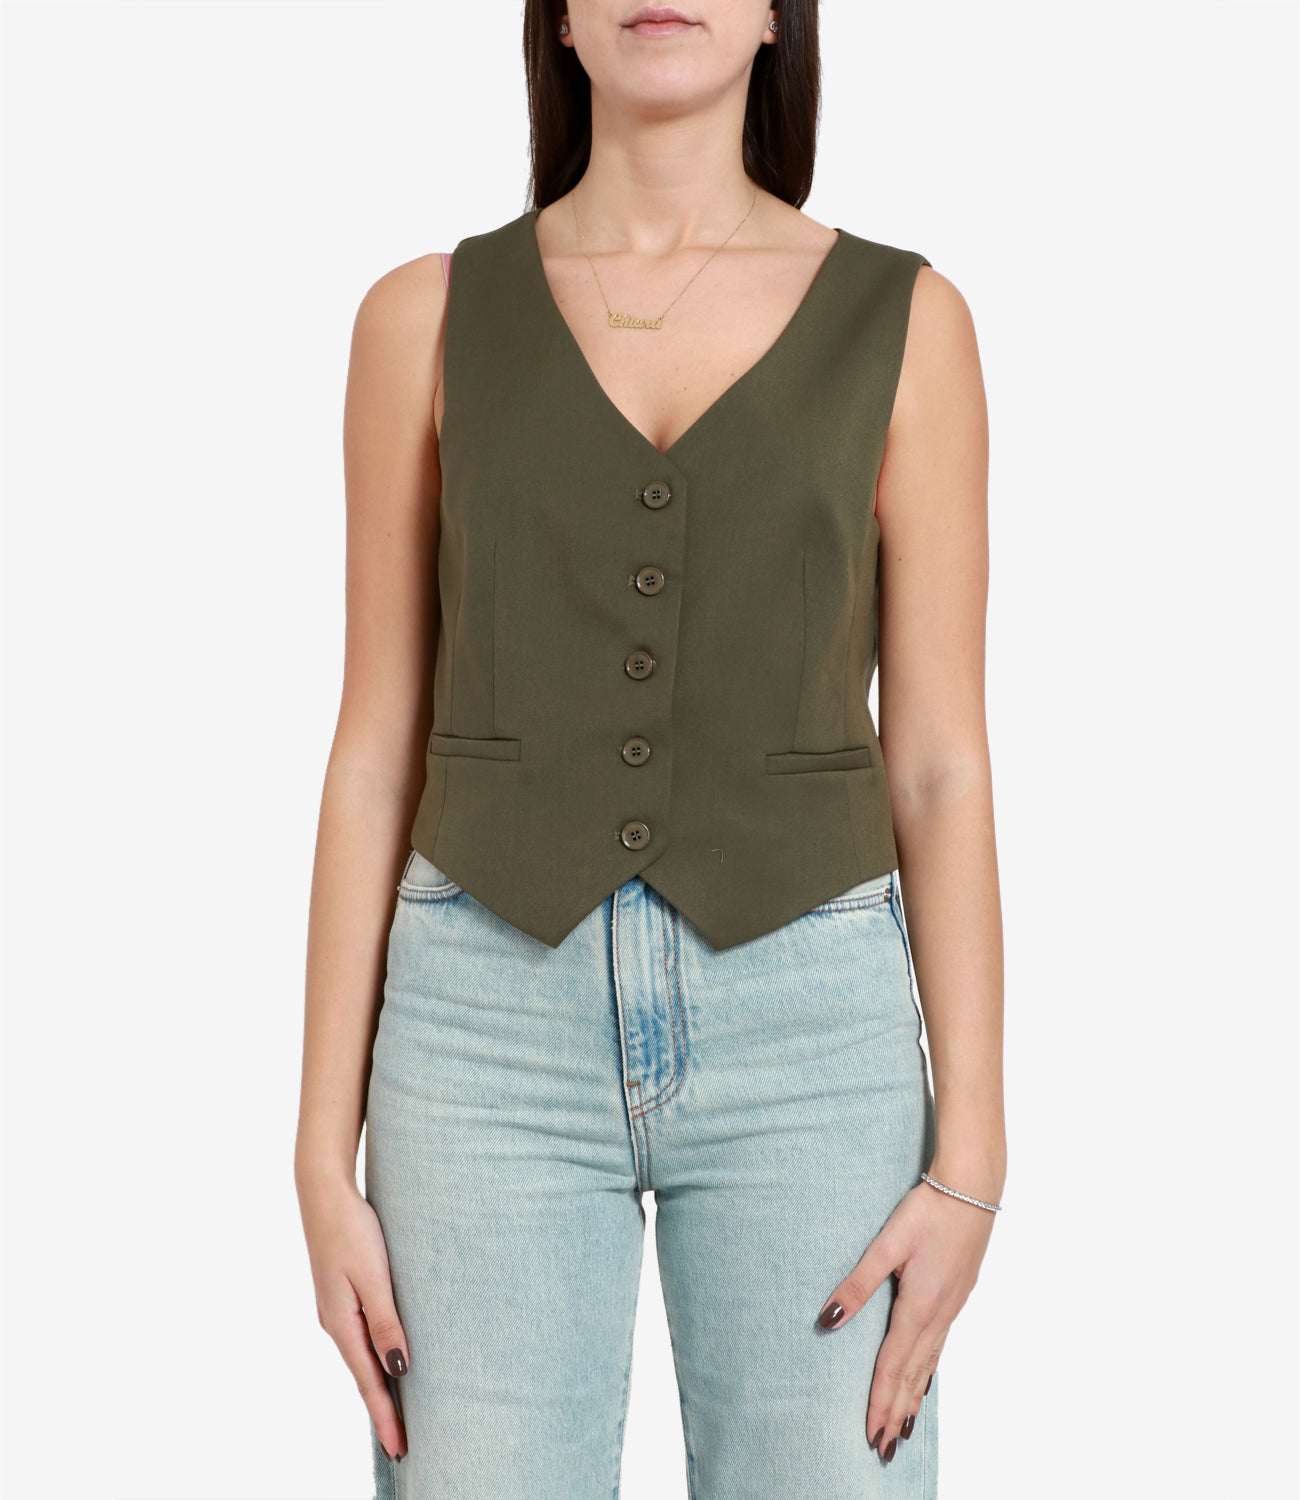 Aniye By | Bustier Jia Verde Militare